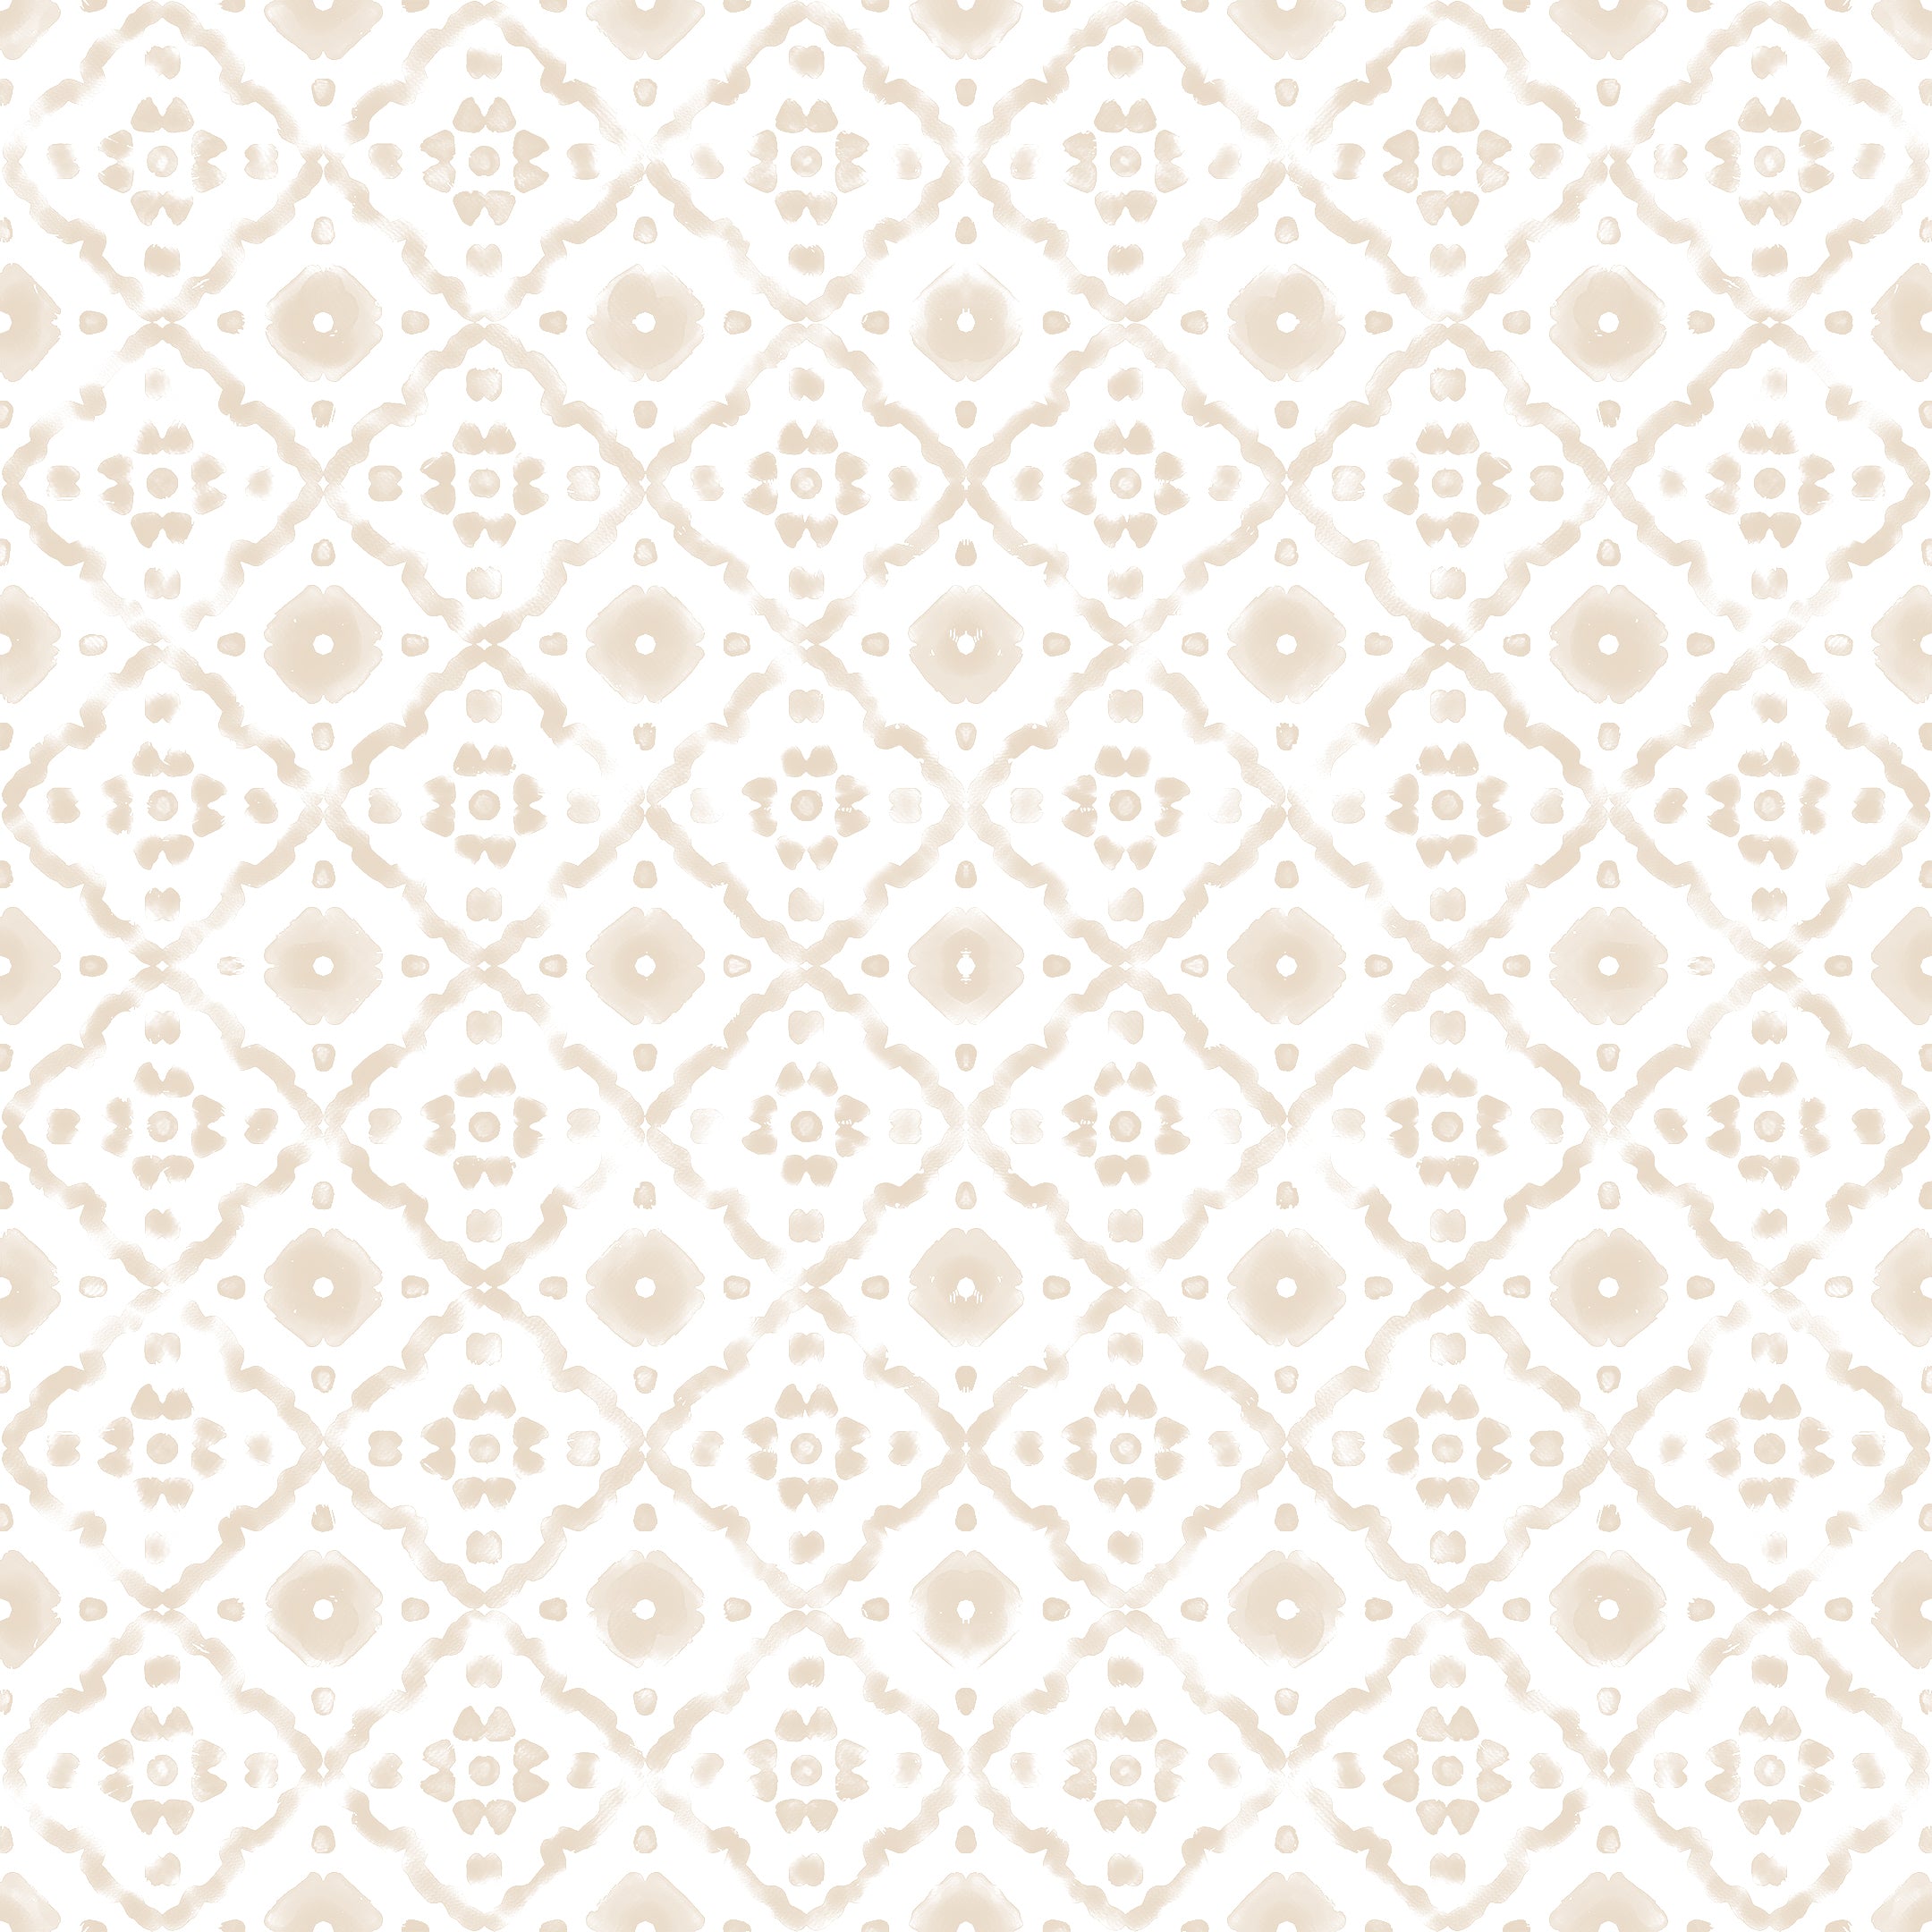 A close-up view of Euclid Wallpaper displaying a detailed geometric pattern with medallions in soft beige on a white background, ideal for adding a touch of elegance and simplicity to any room.